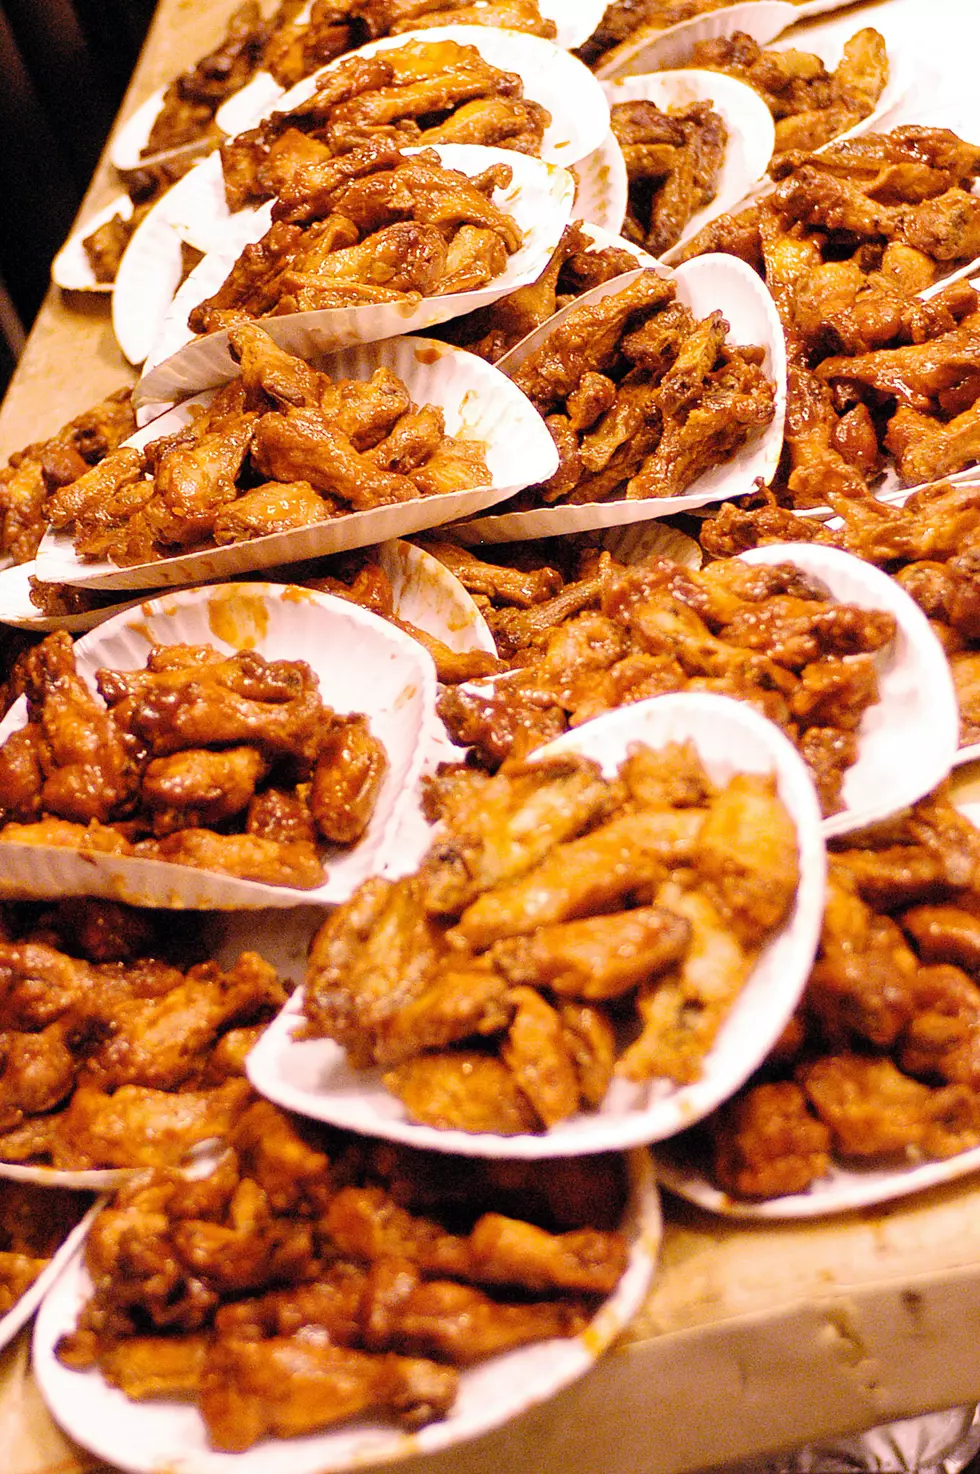 Wing Wars Returns to Poughkeepsie January 30th